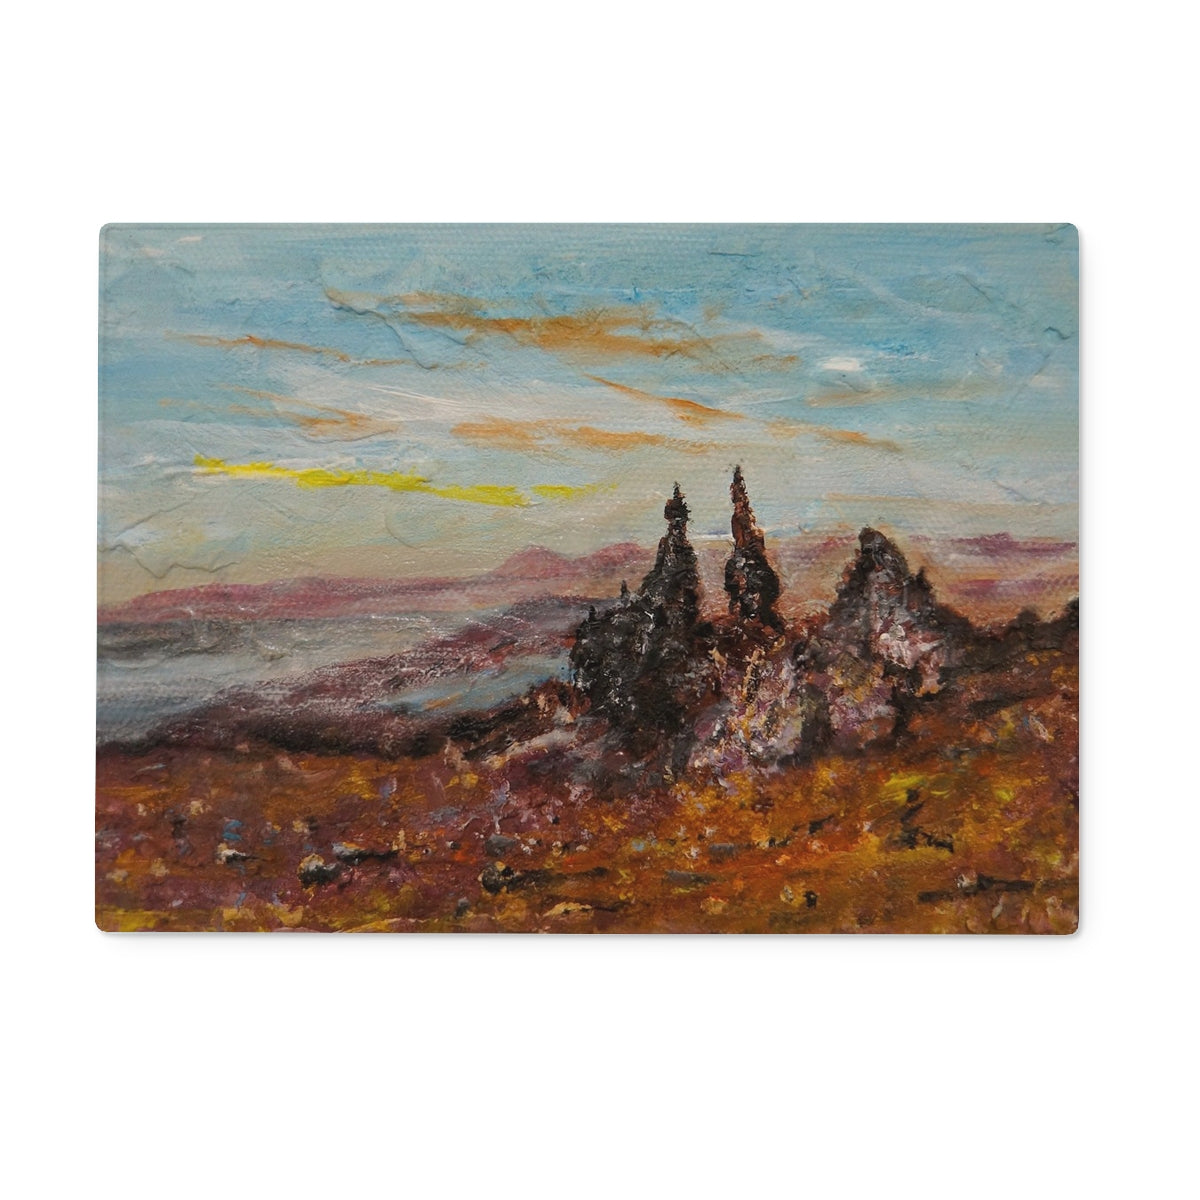 The Old Man Of Storr Skye Art Gifts Glass Chopping Board-Glass Chopping Boards-Skye Art Gallery-15"x11" Rectangular-Paintings, Prints, Homeware, Art Gifts From Scotland By Scottish Artist Kevin Hunter